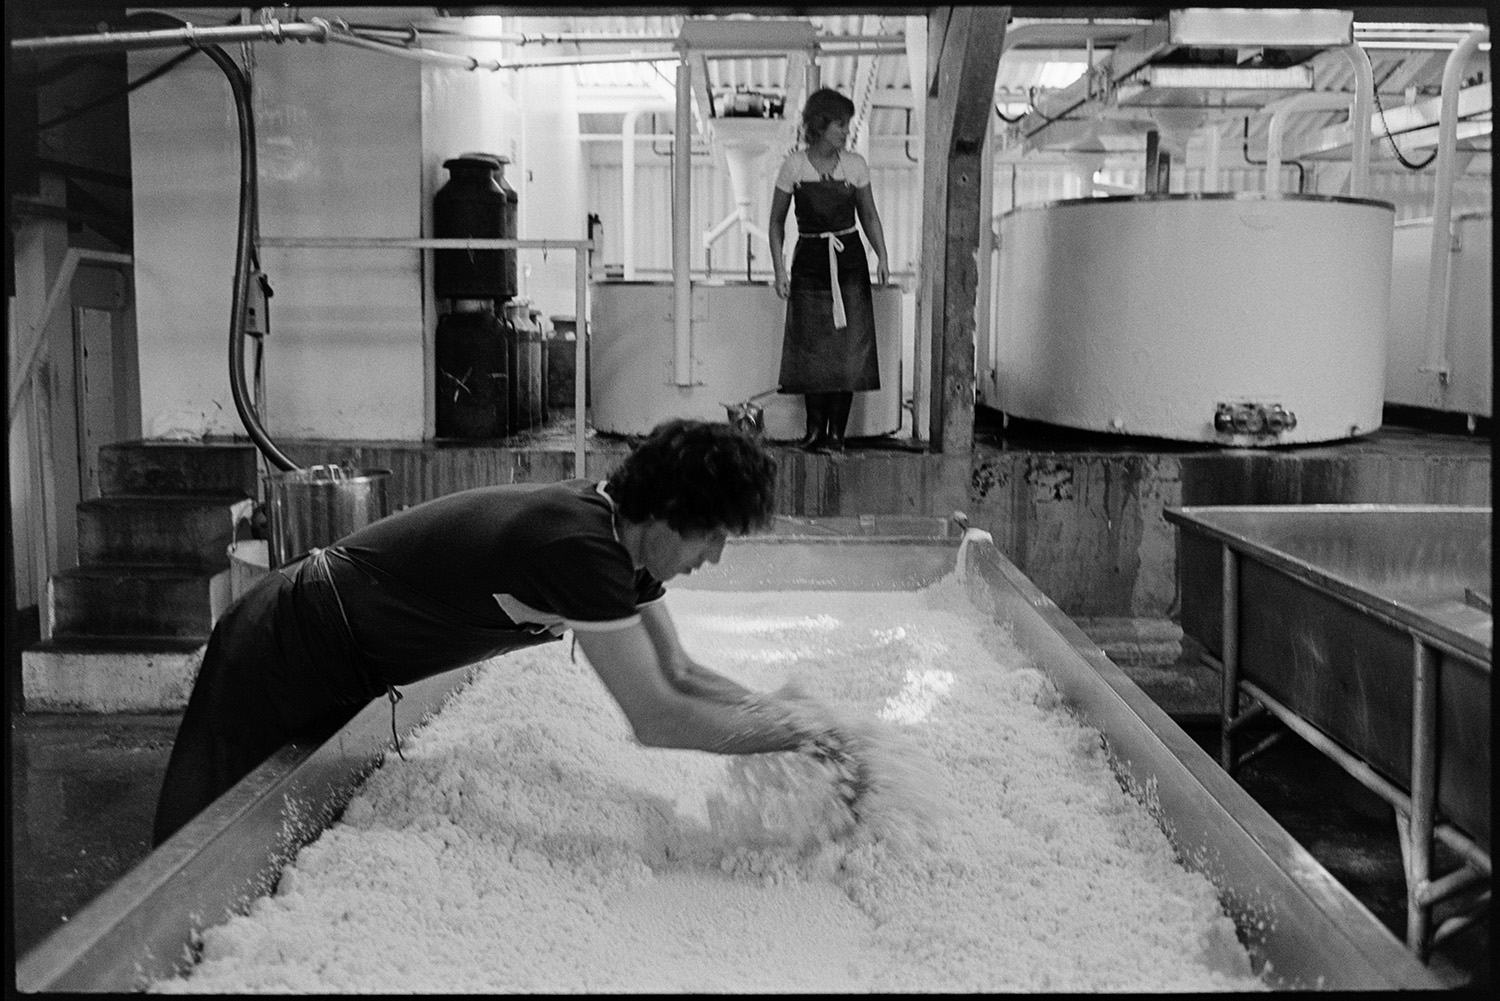 Men and women working in cheese factory, mixing vats, emptying churn into vat. 
[A man stirring a vat of cheese with his arms in the cheese factory at Hawkridge Farm, Chawleigh. A woman is stood in the background by other vats.]